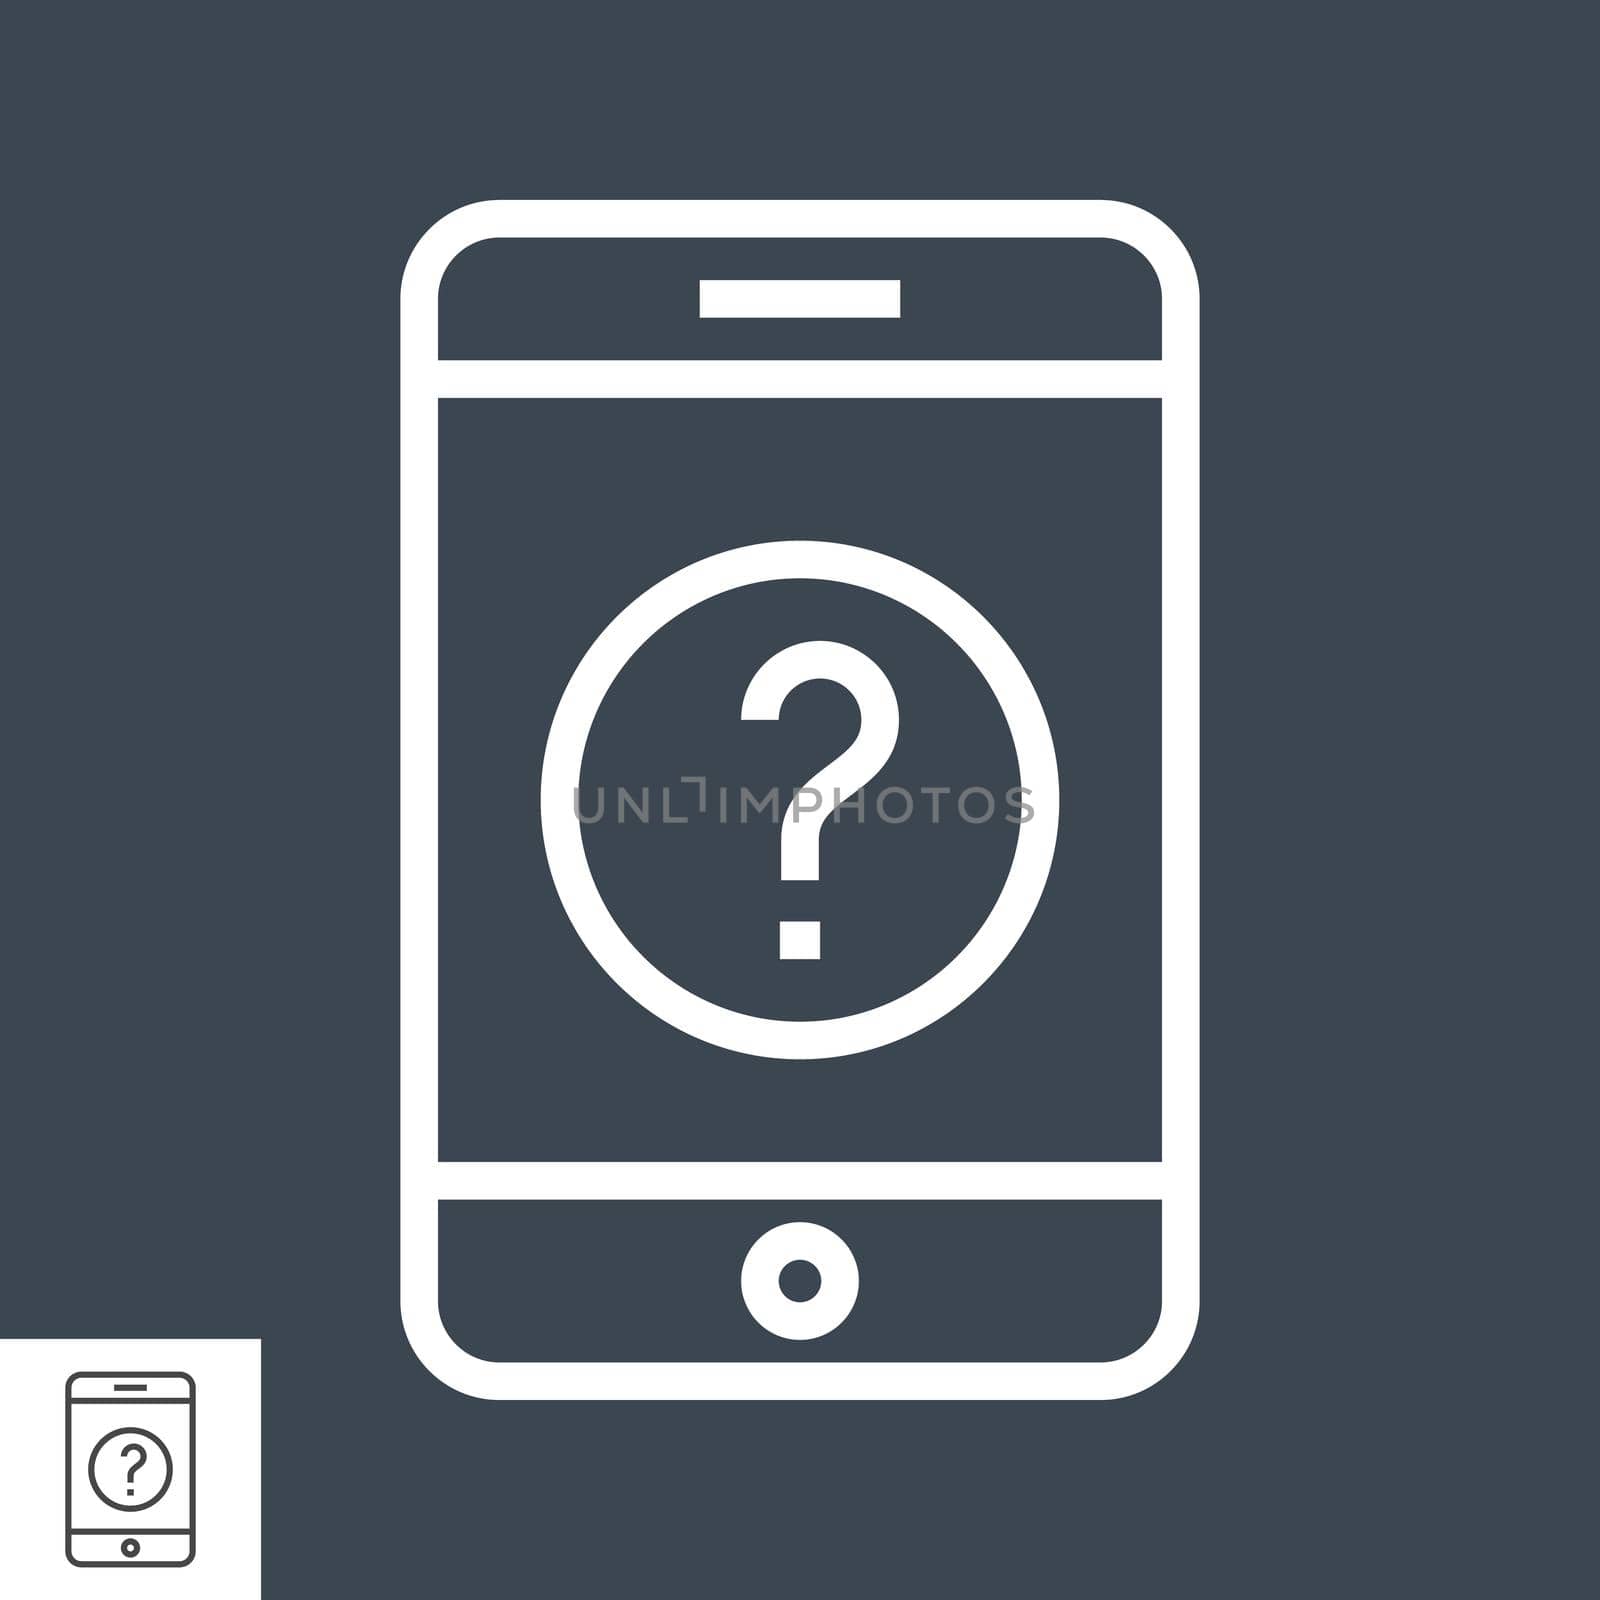 Smartphone with Question Mark Thin Line Vector Icon. Flat icon isolated on the black background. Editable EPS file. Vector illustration.